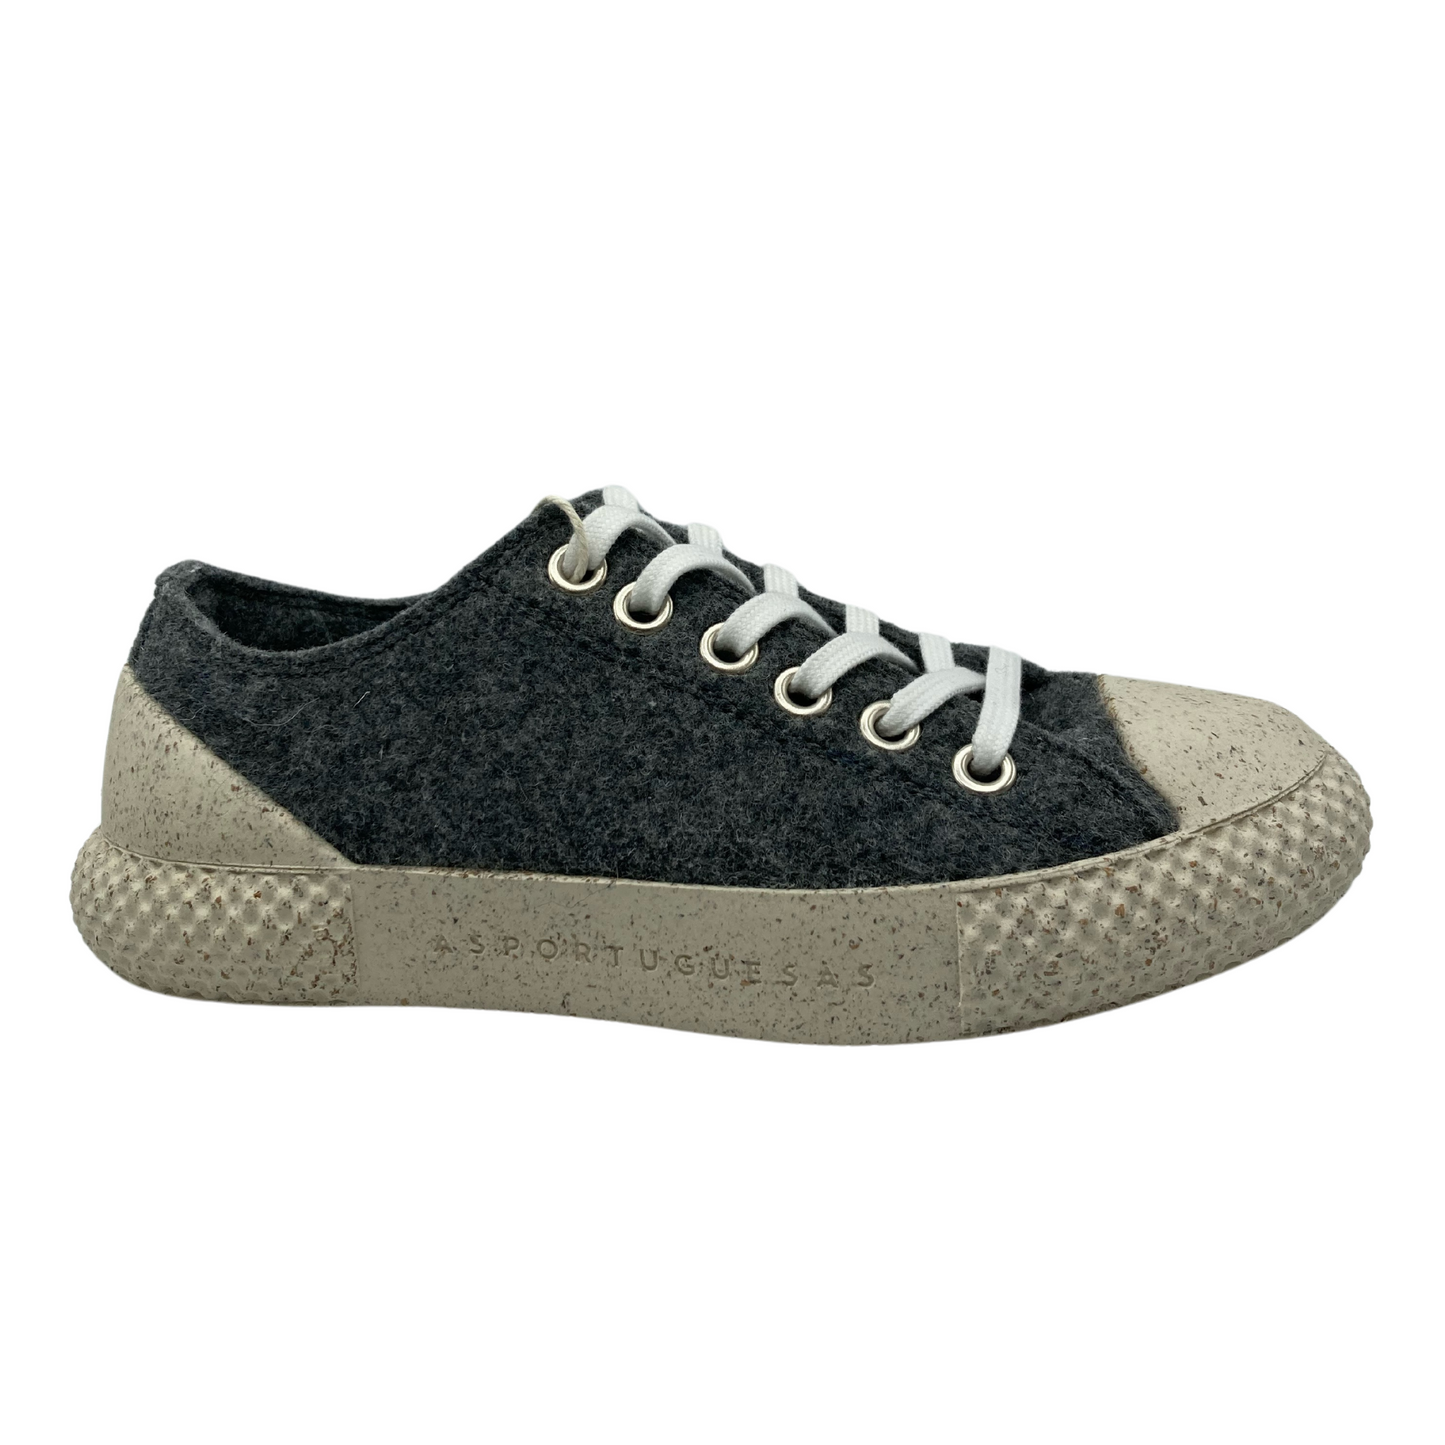 Right facing view of wool sneakers with cork outsole